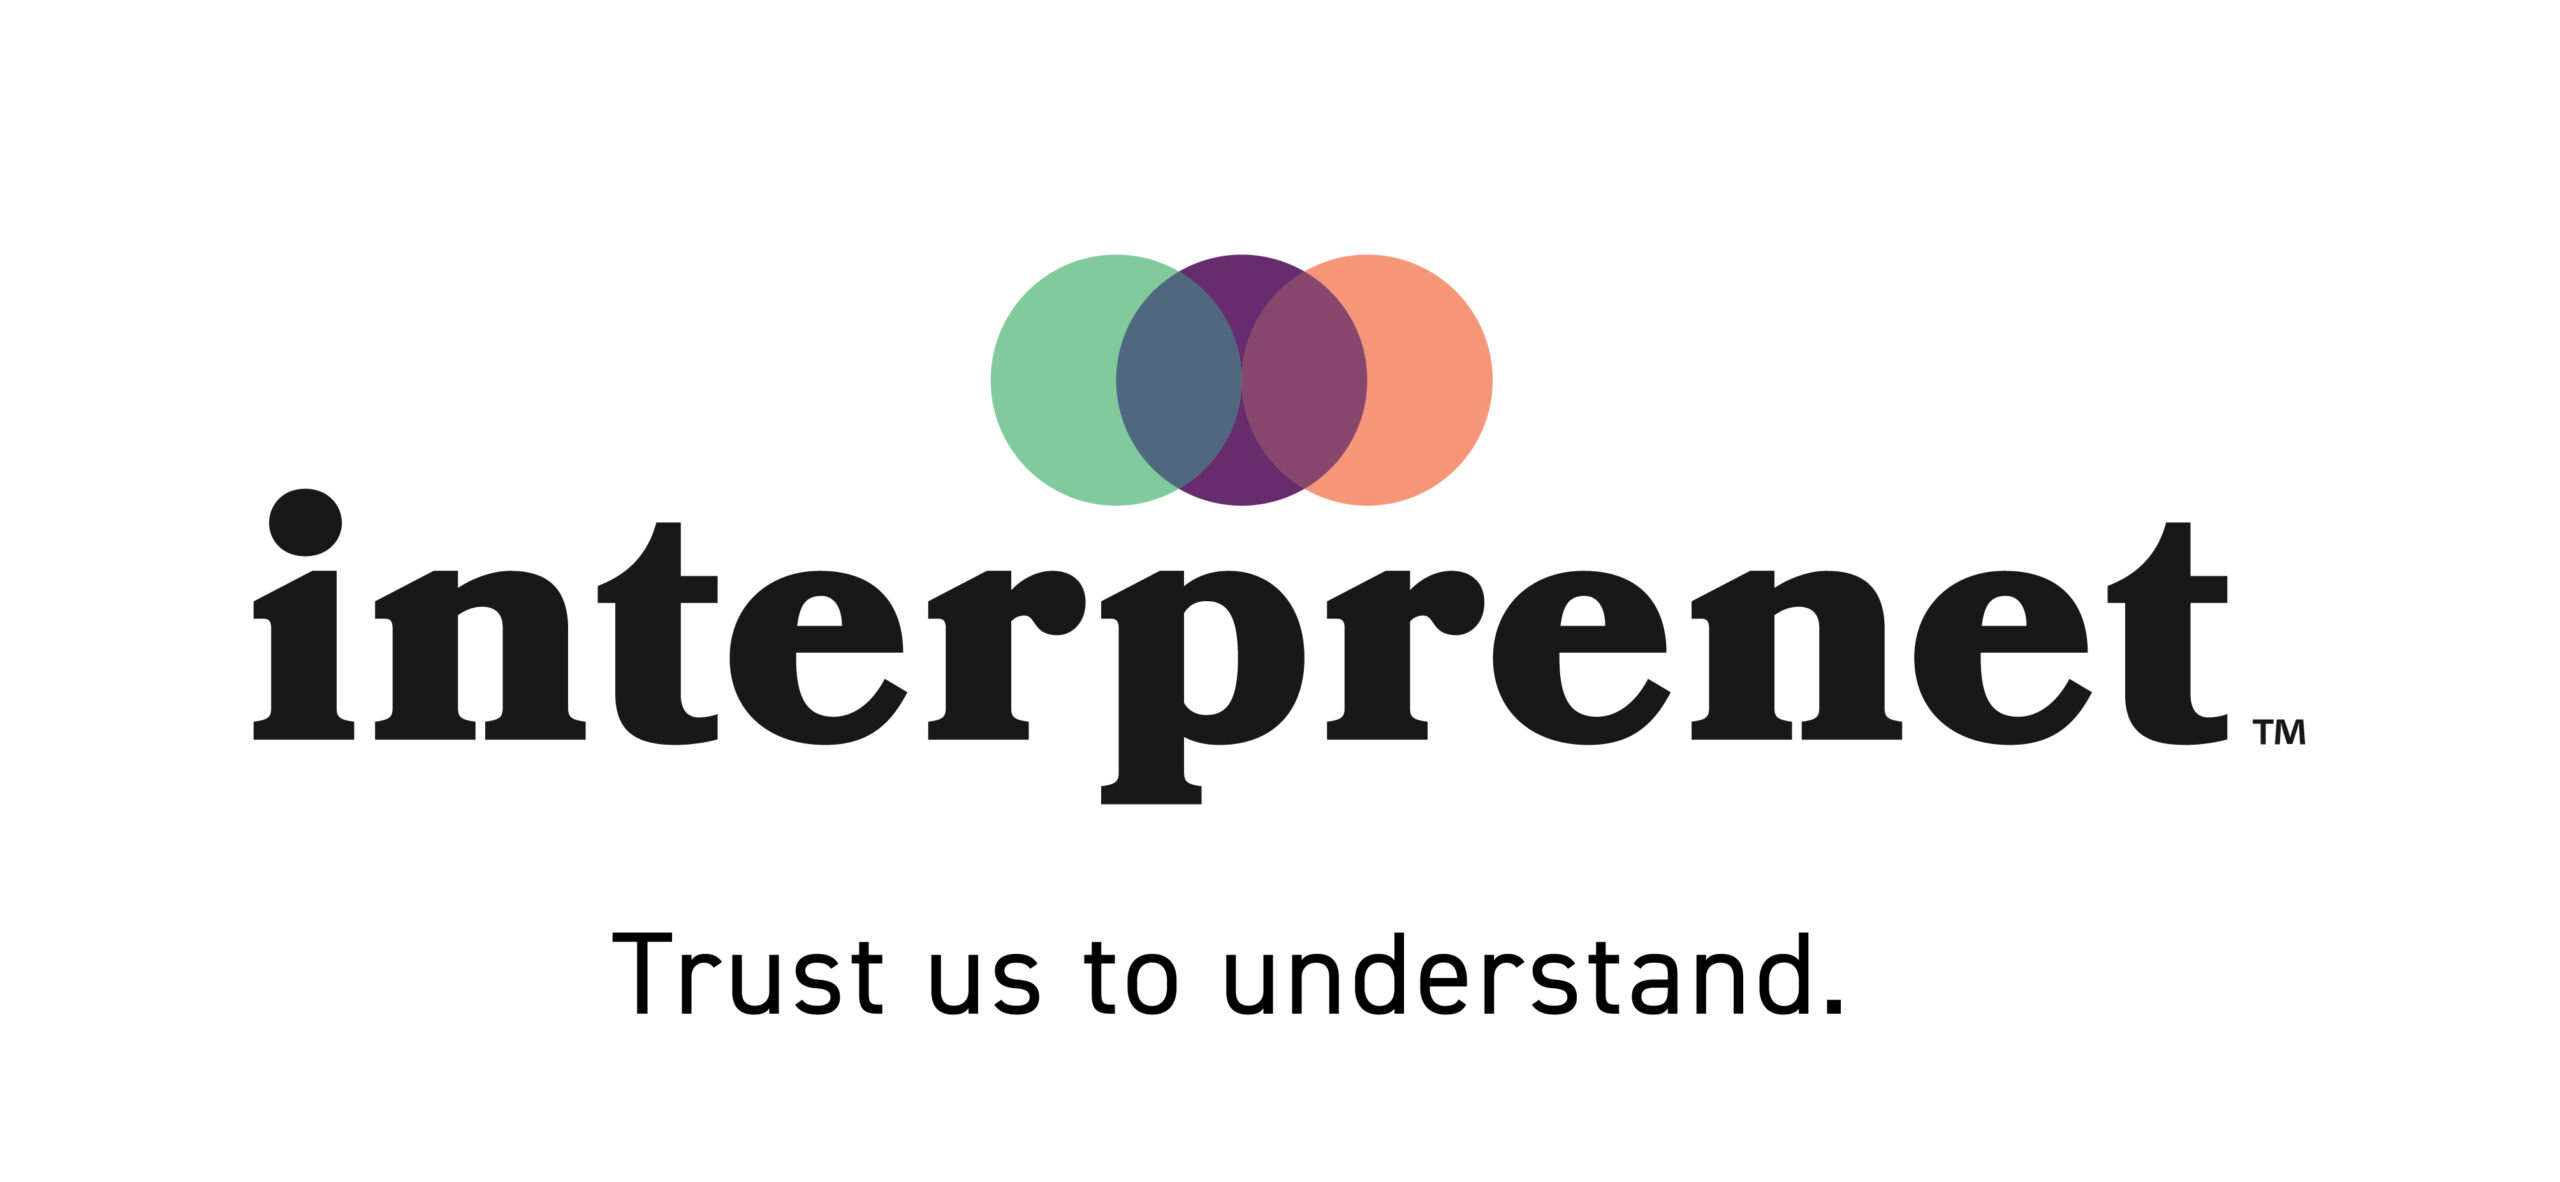 Interprenet is a global language service provider committed to connecting the world with a distinct blend of human and tech-forward solutions powered by client-centric consultation since 2004.